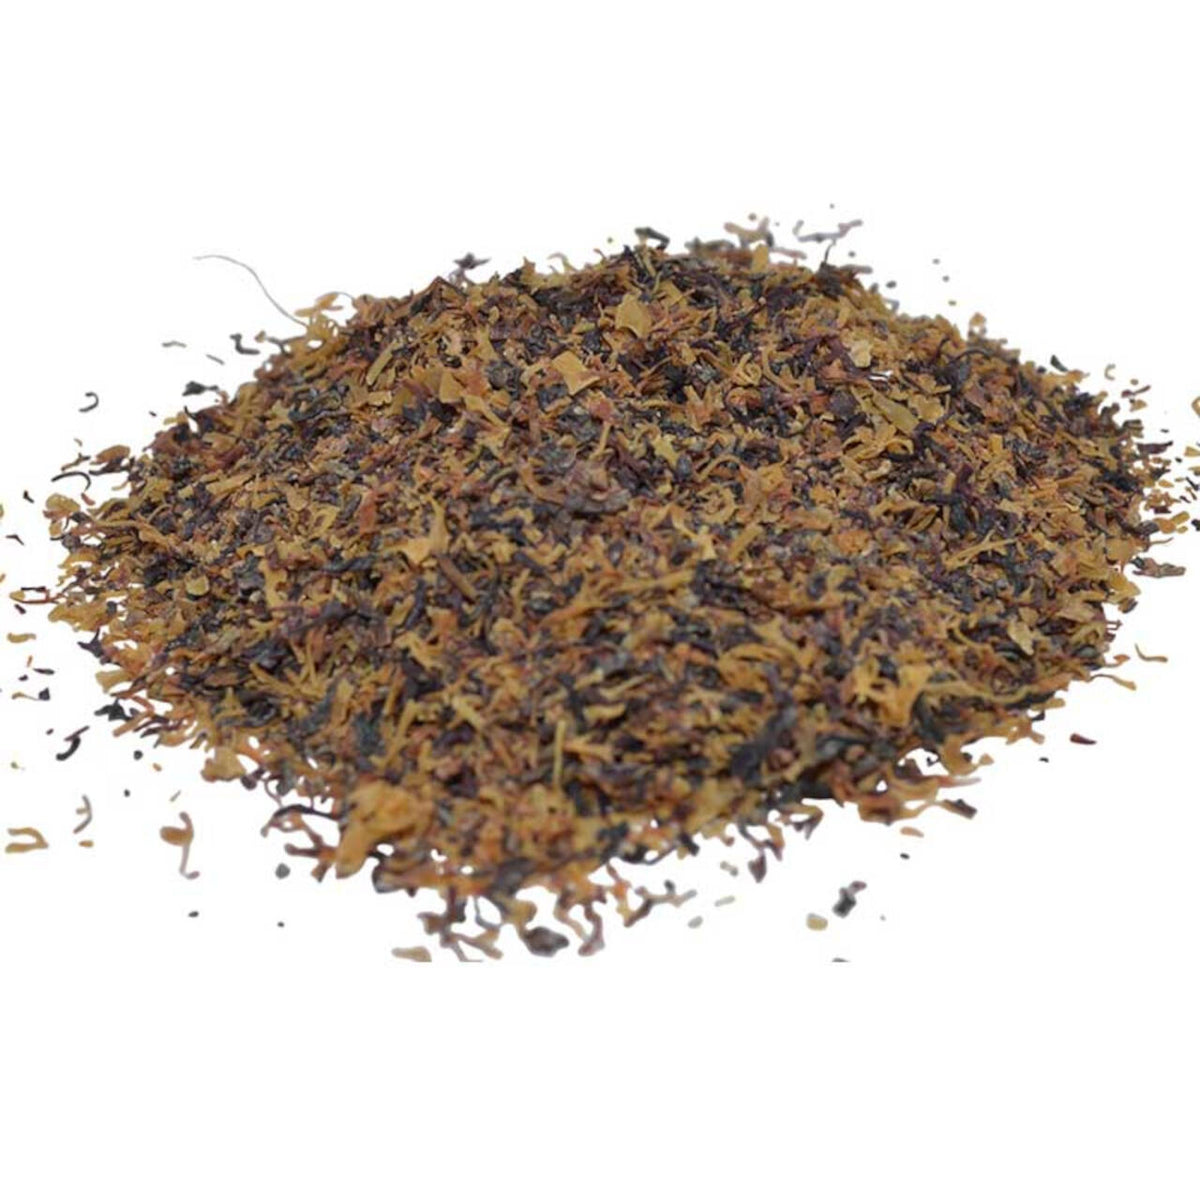 Irish Moss - Cut 1oz for Luck, Money, and Protection